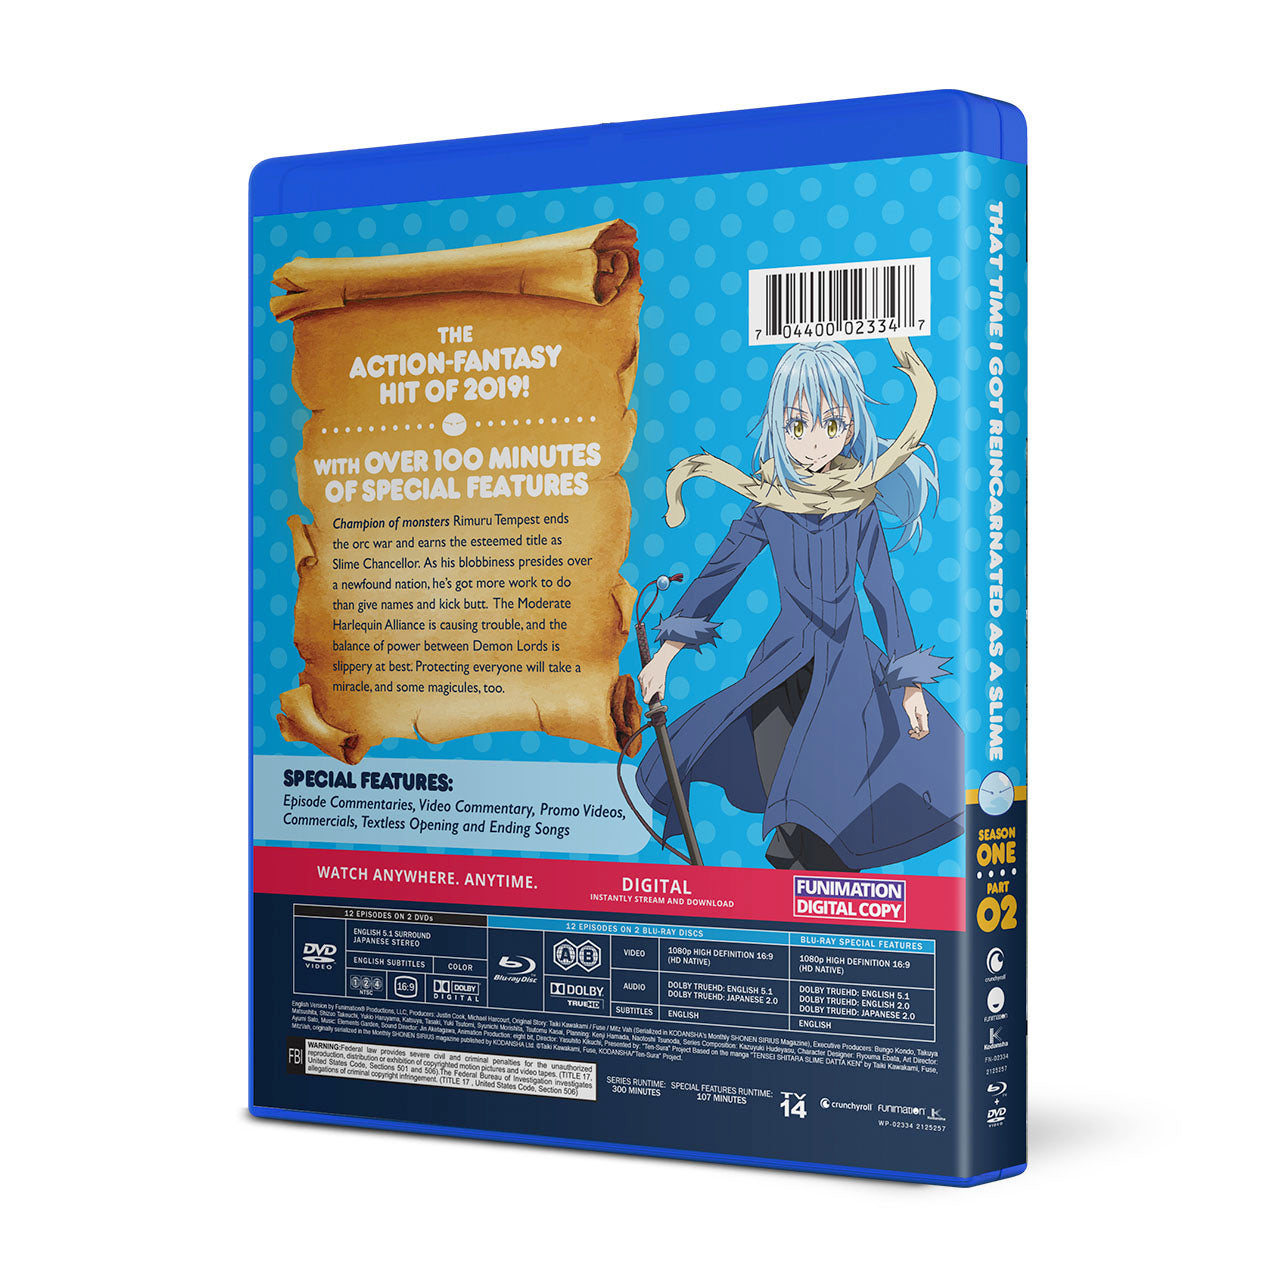 That Time I Got Reincarnated as a Slime - Season 1 Part 2 - Blu-ray + DVD image count 2